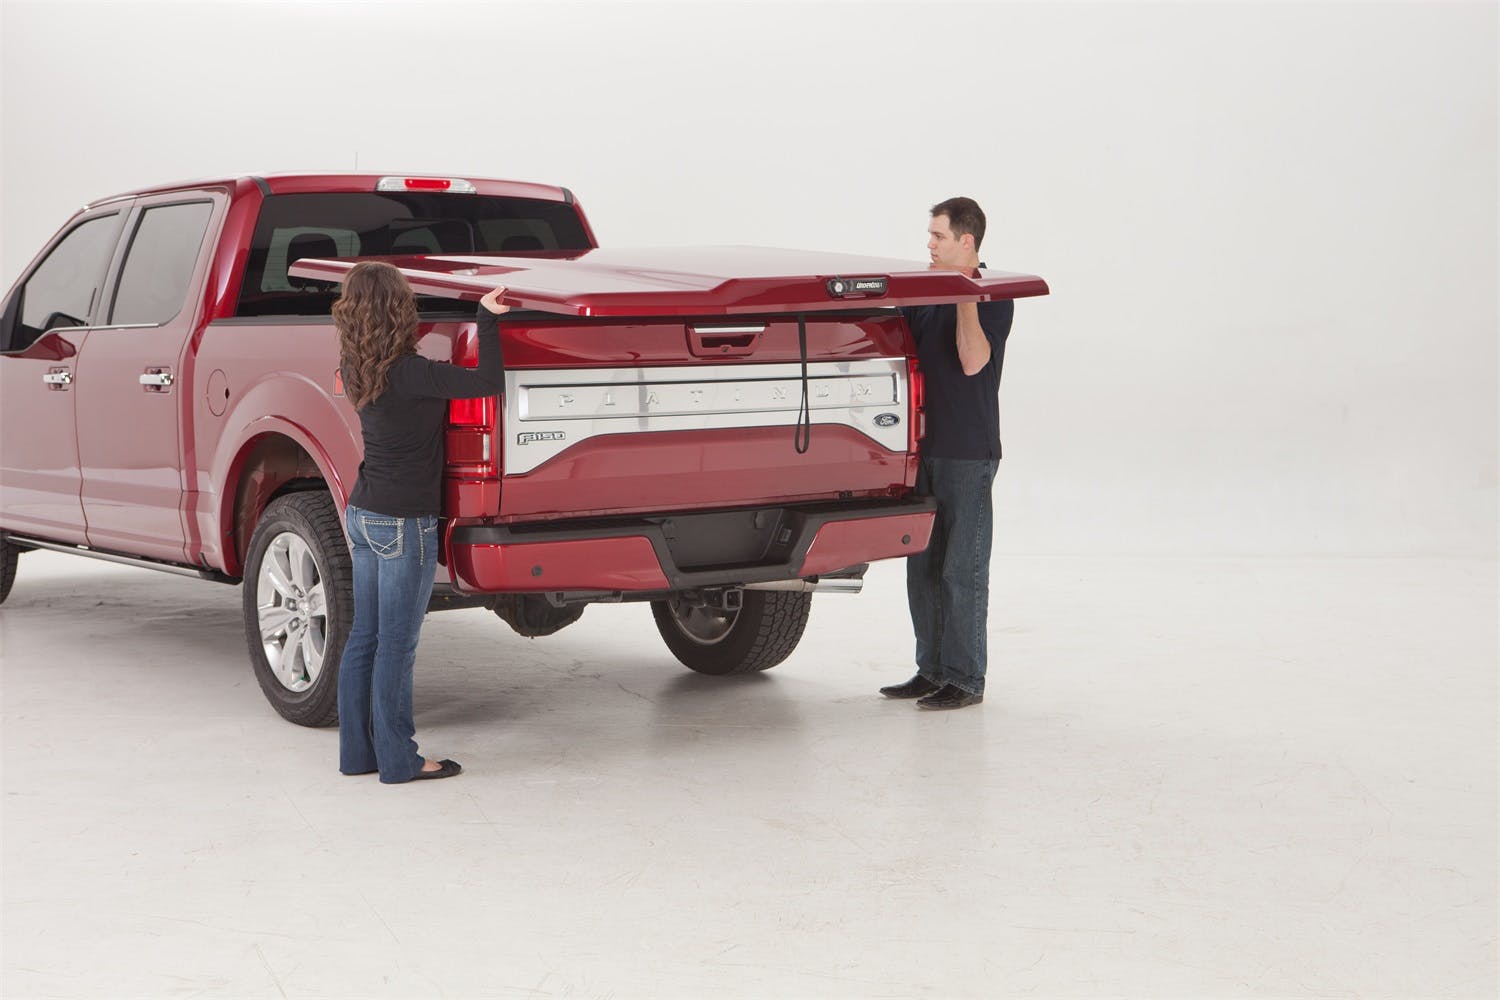 UnderCover UC1128L-G7C Elite LX Tonneau Cover, Pull Me Over Red